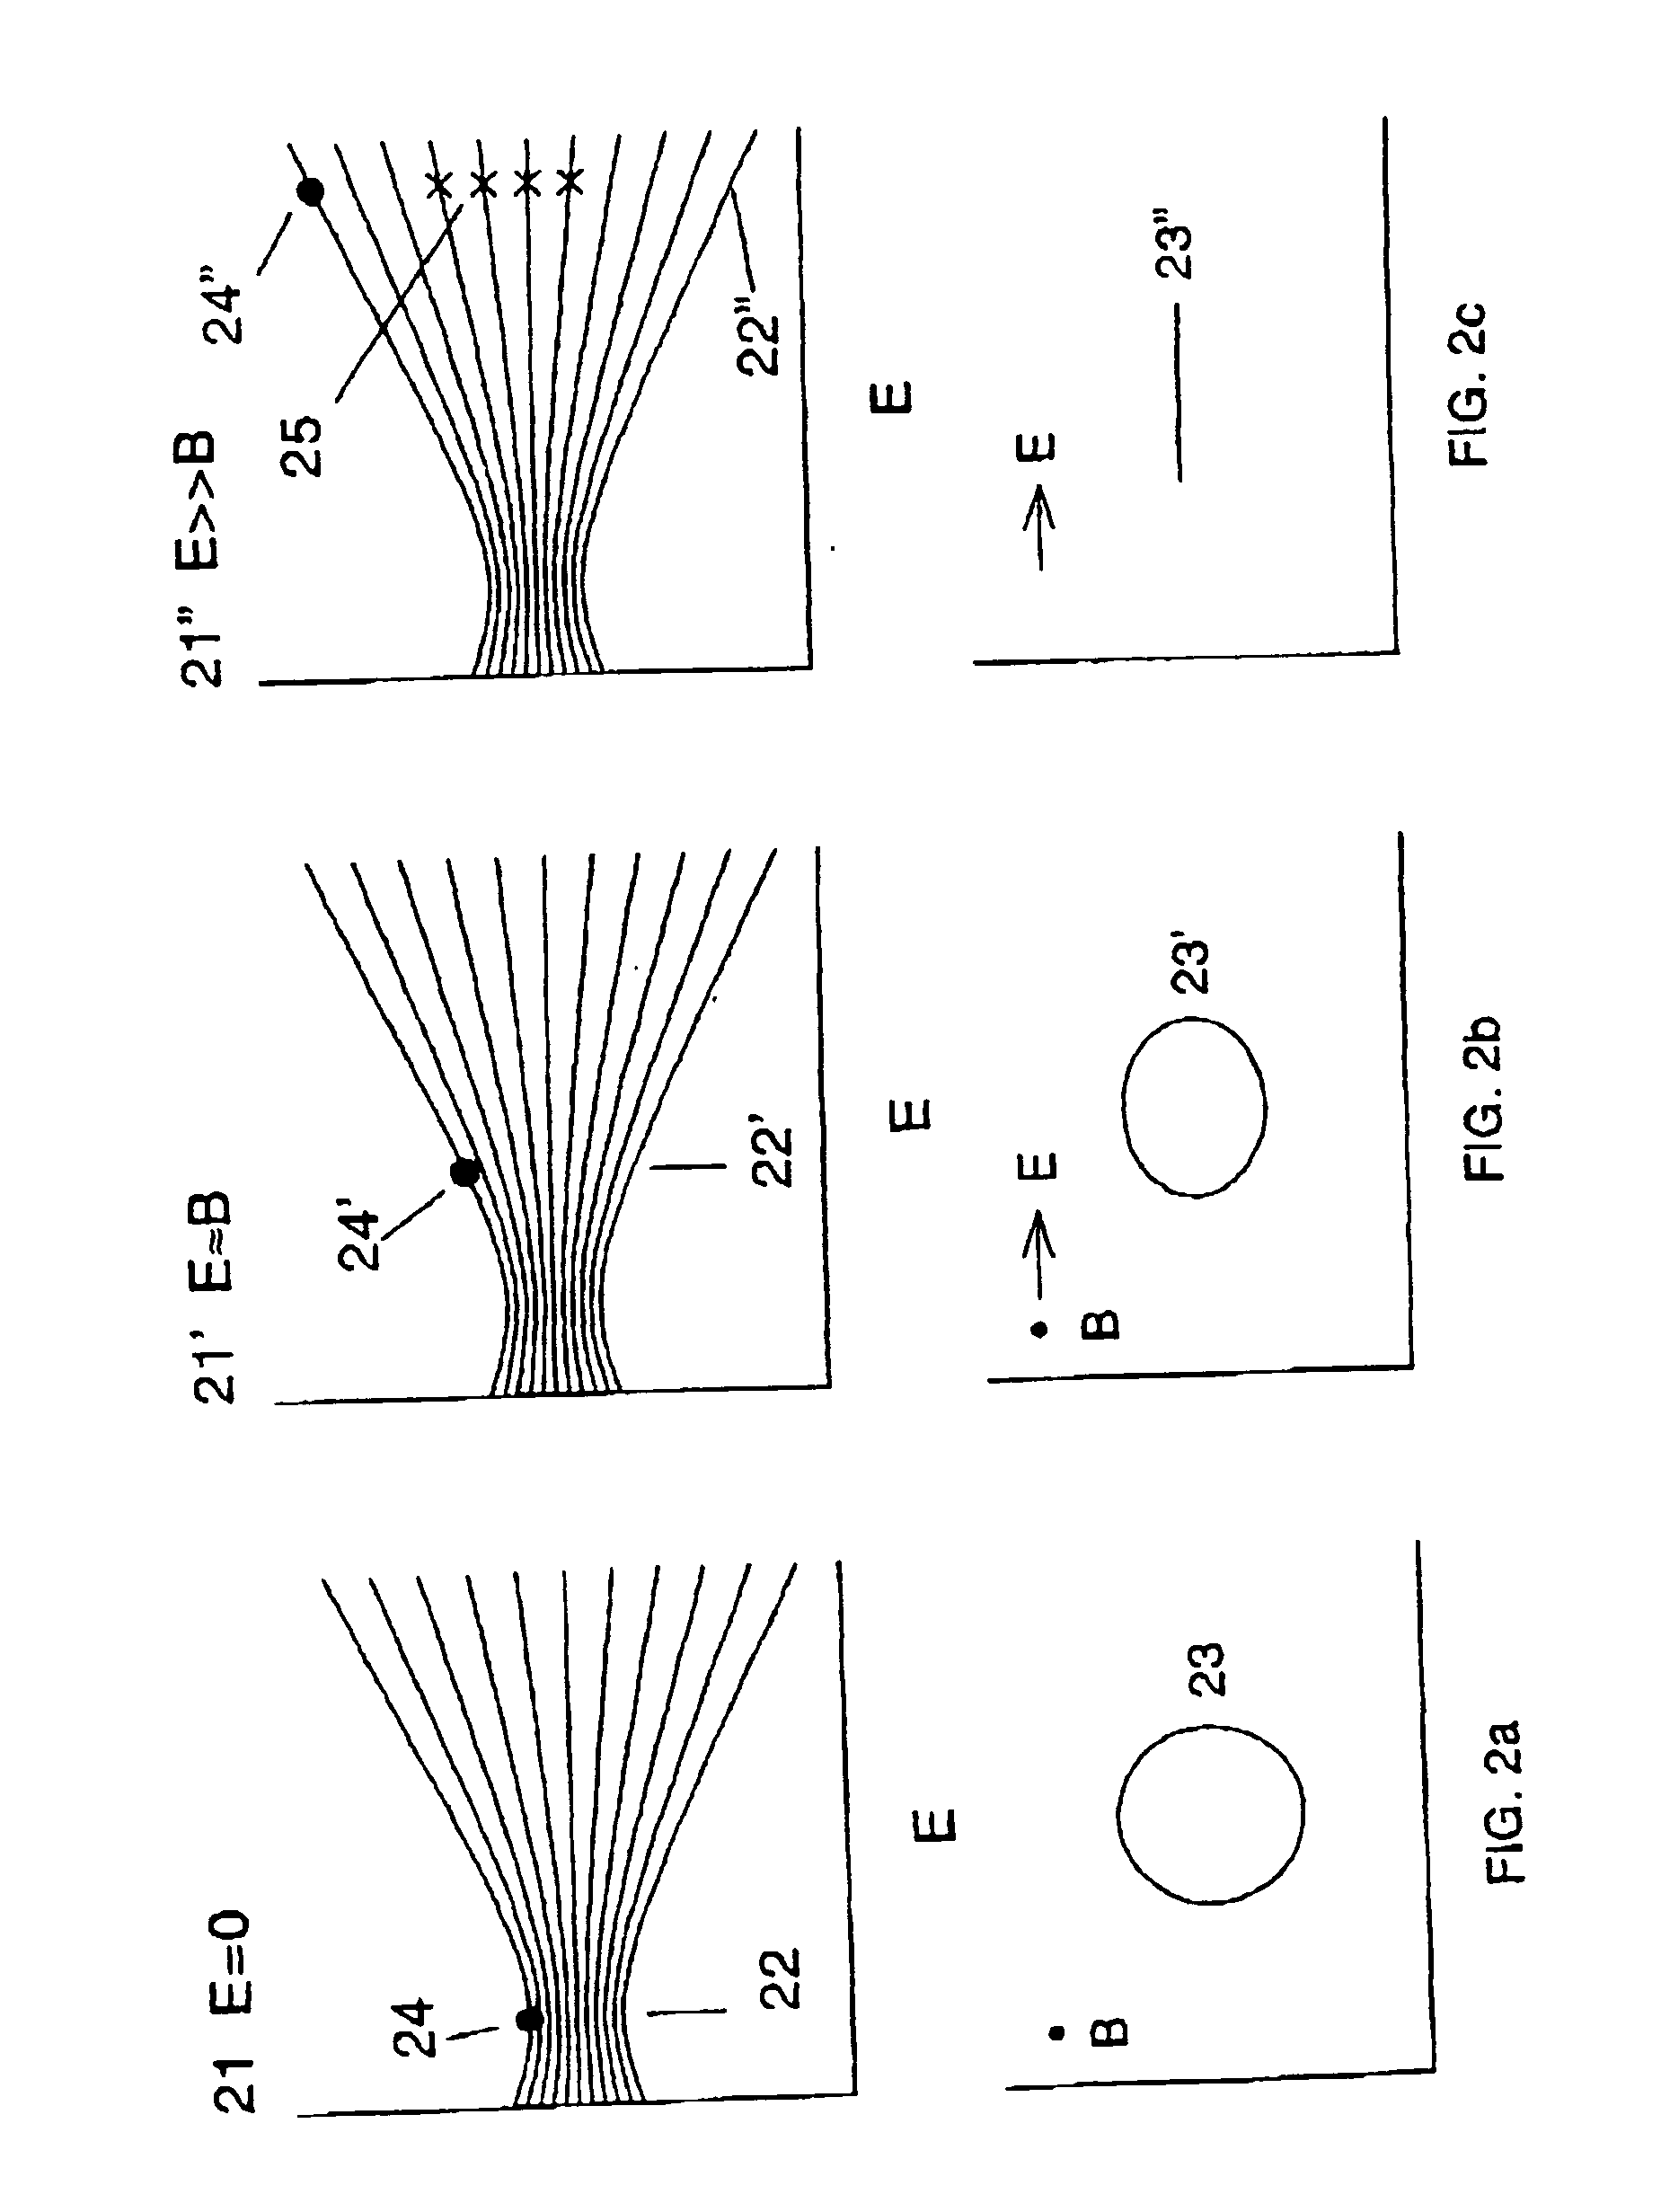 Method and apparatus for measuring magnetic field strengths